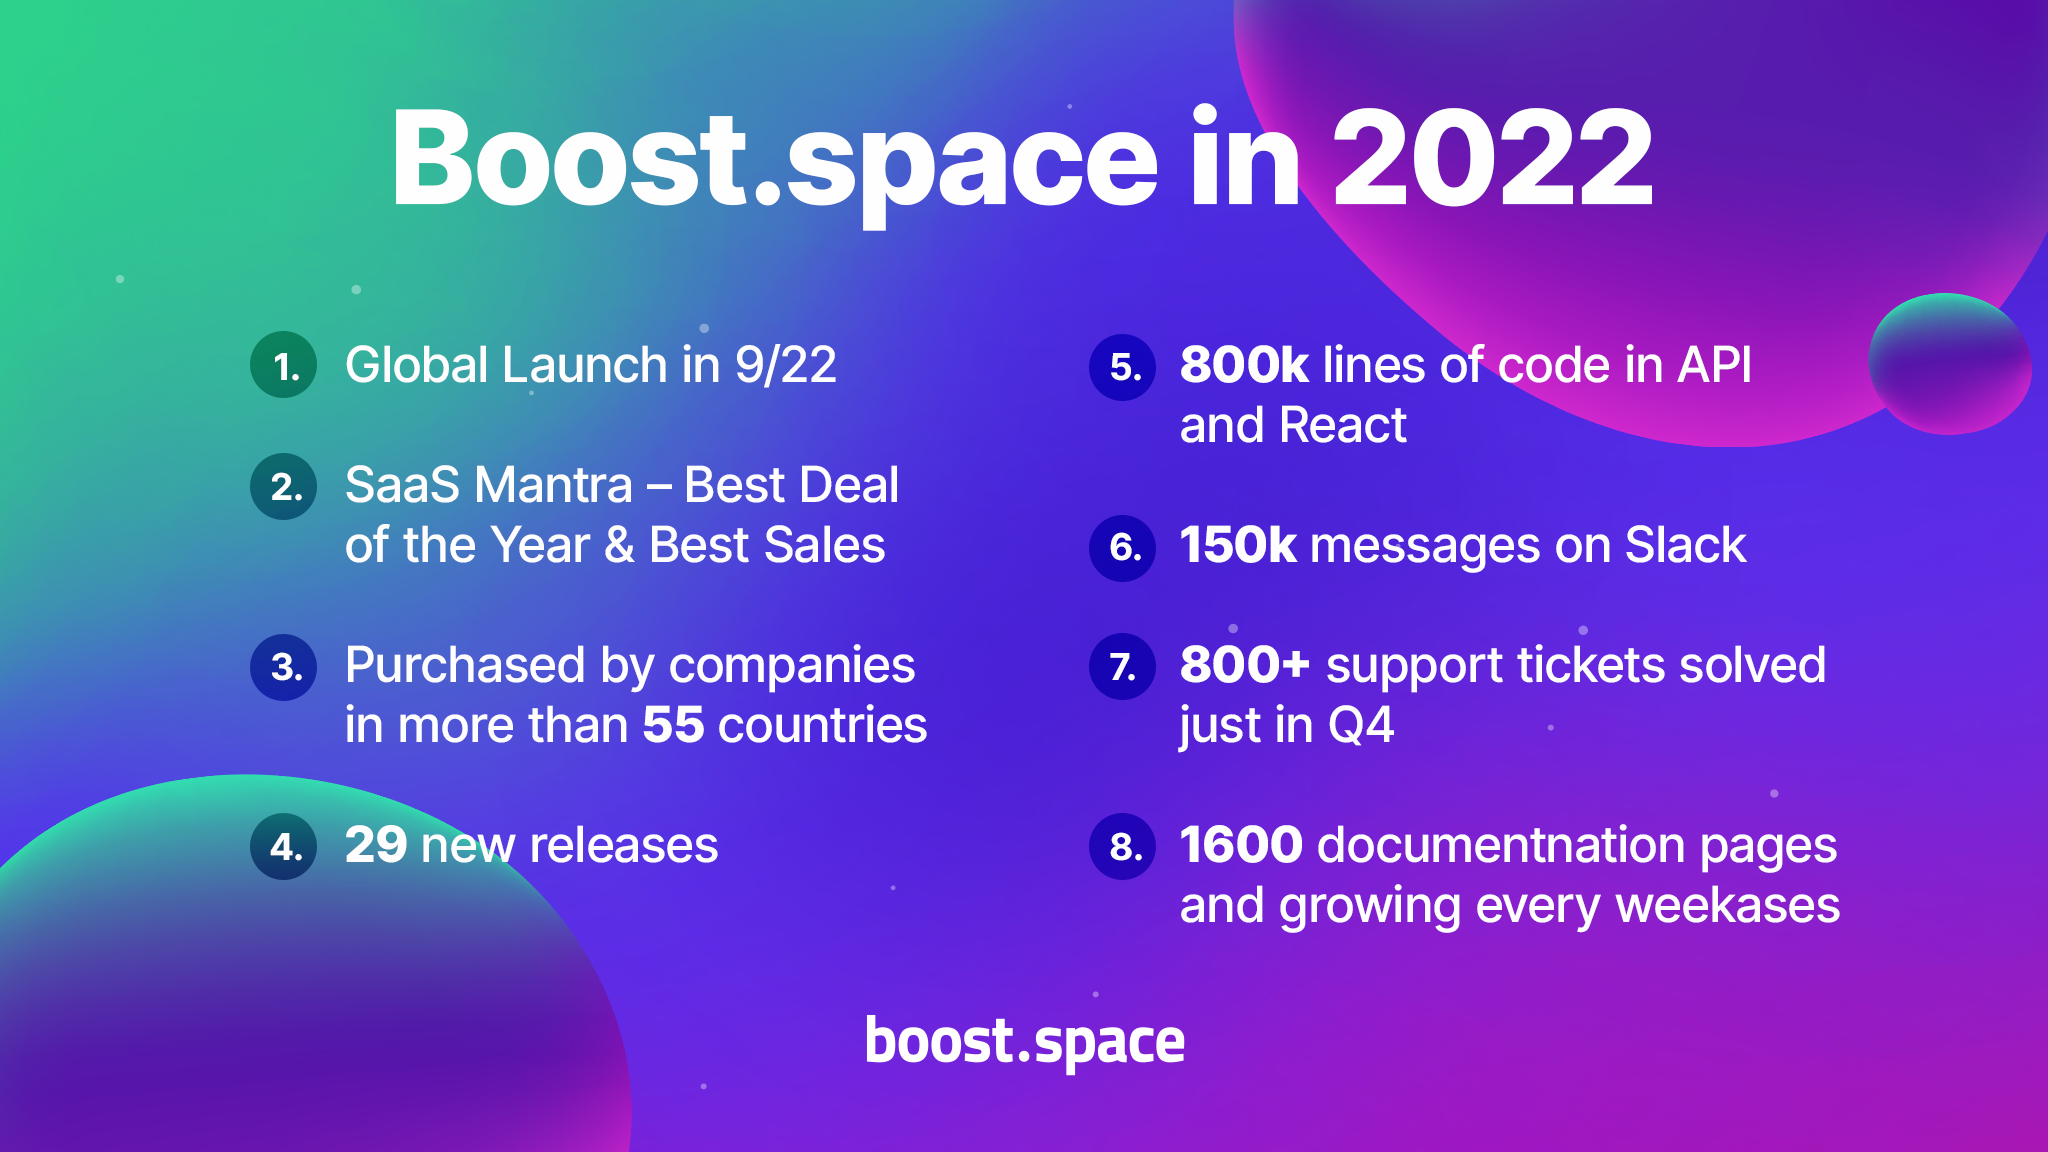 Overview: Boost.space in 2022